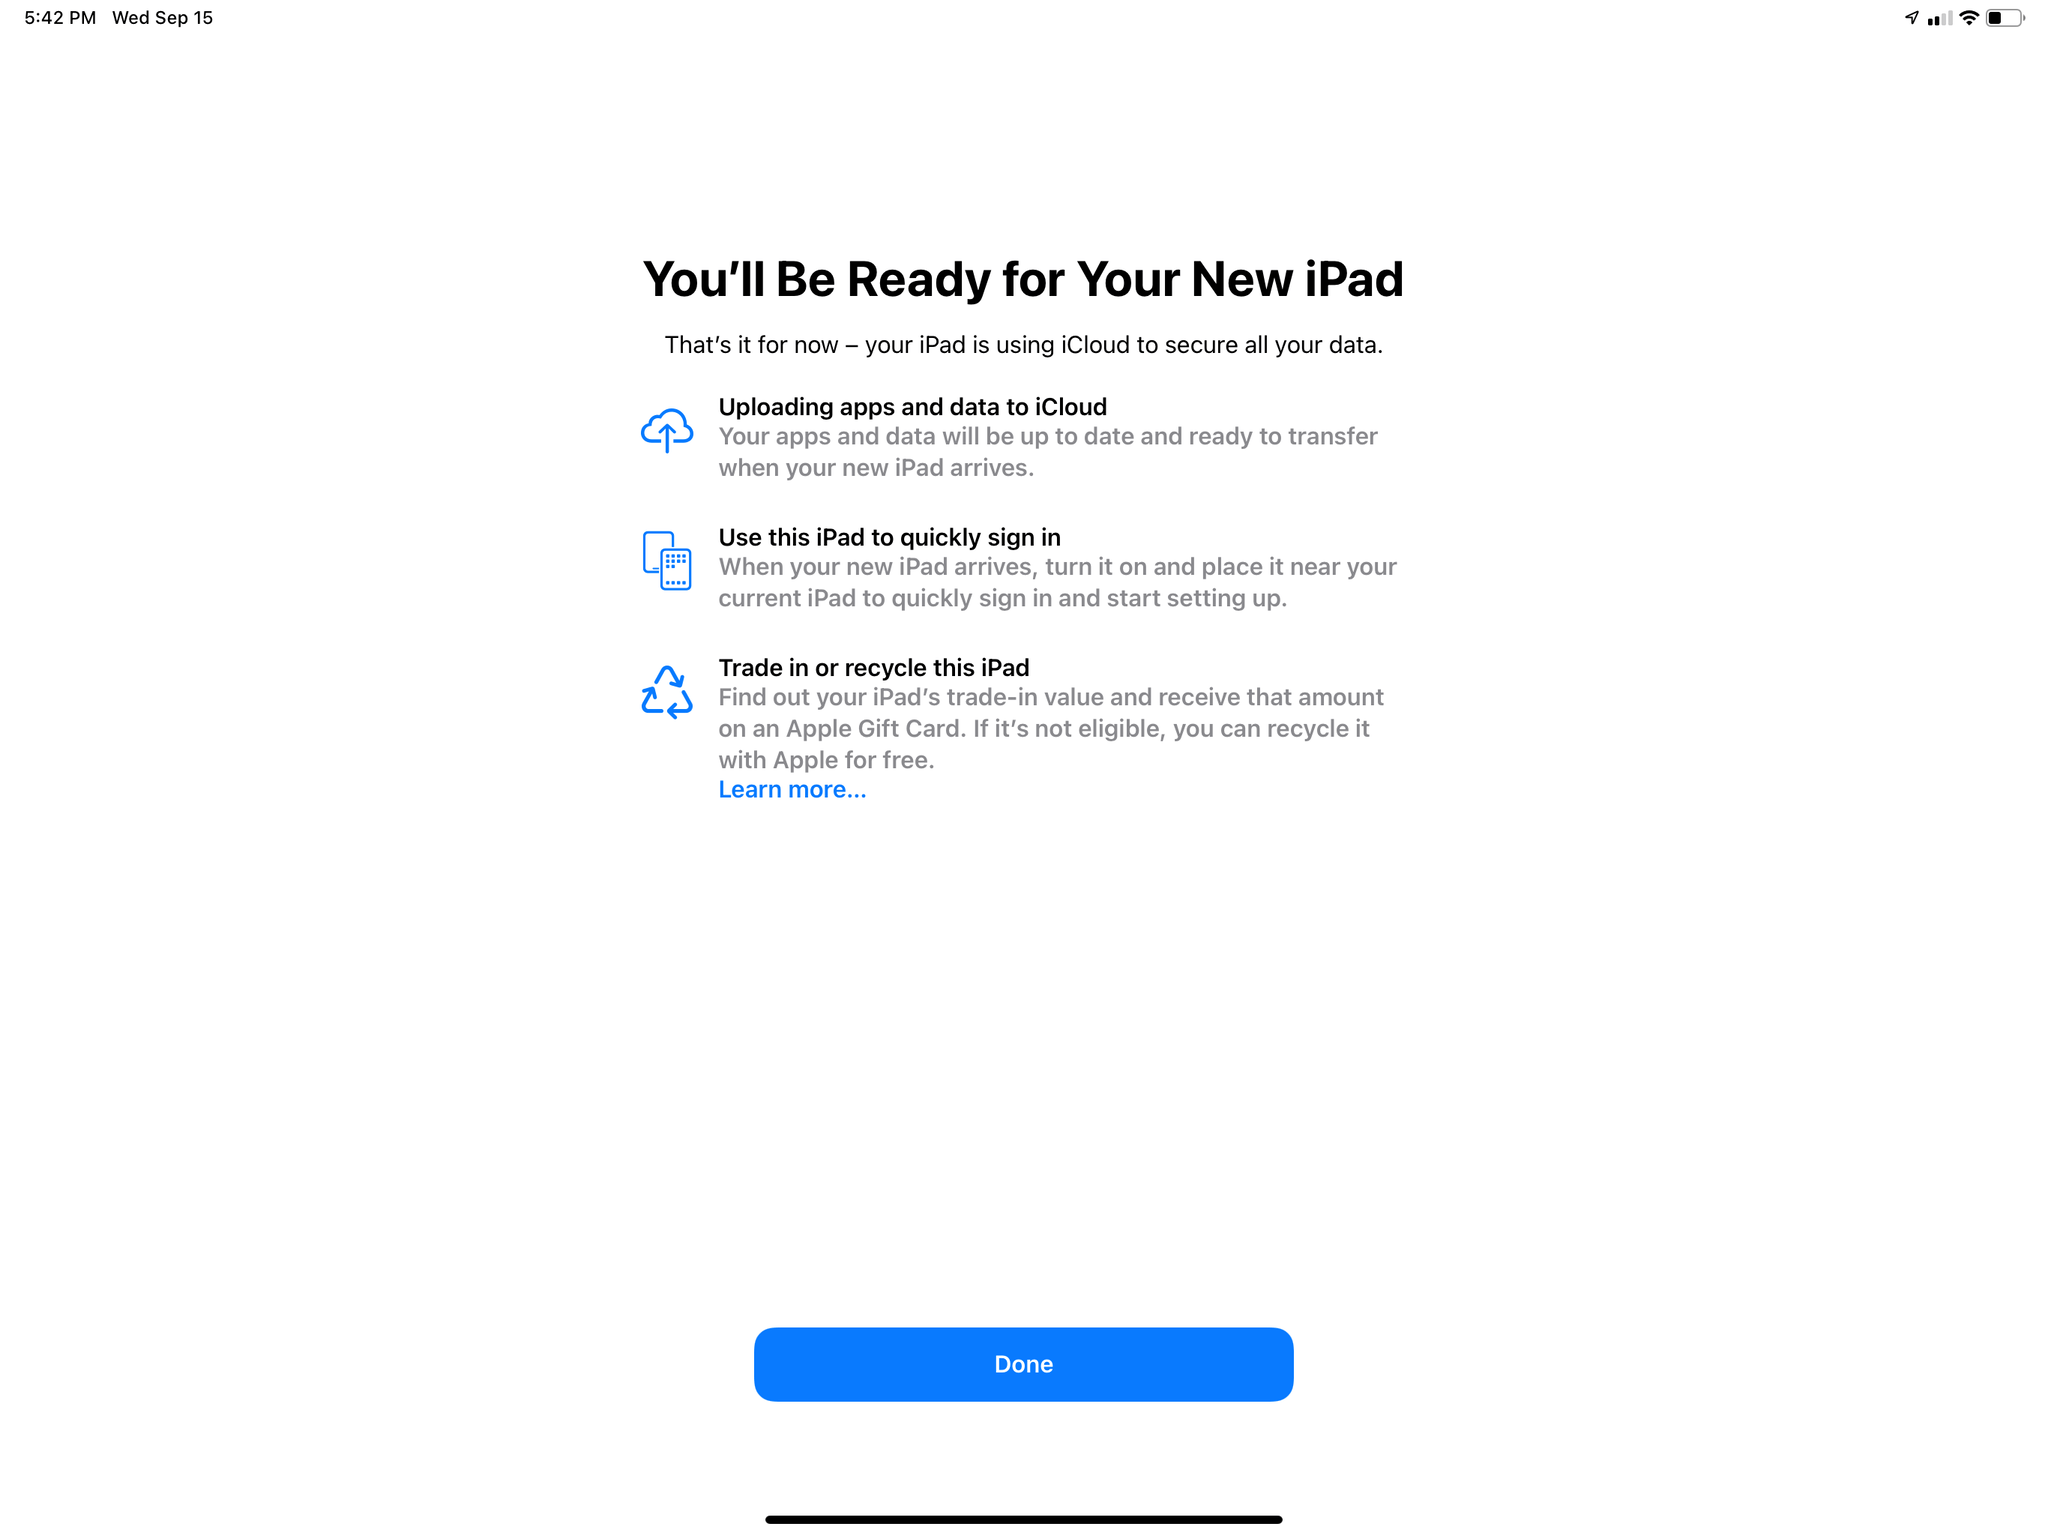 Preparing for a new iPad in iPadOS 15.